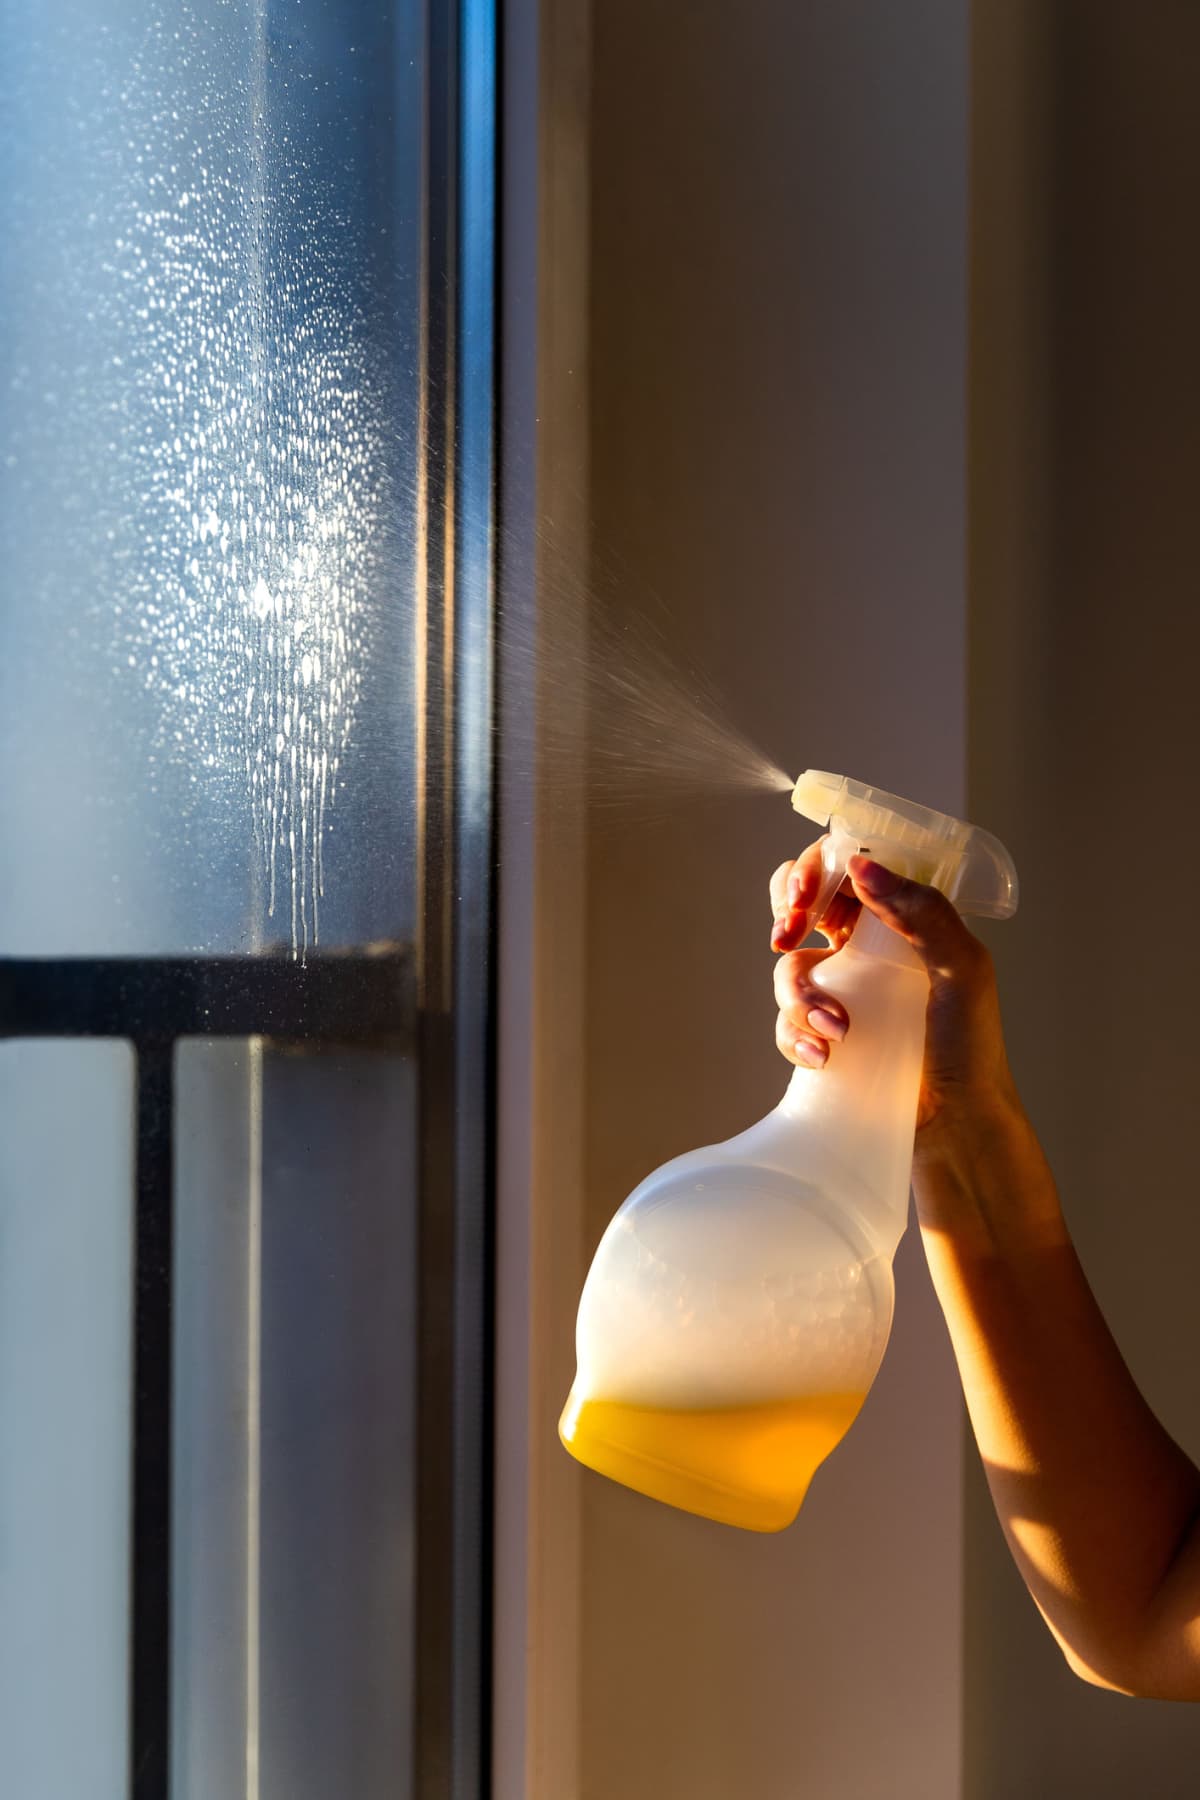 A woman cleaning a window using cleaning sprayer with yellow washing liquid.